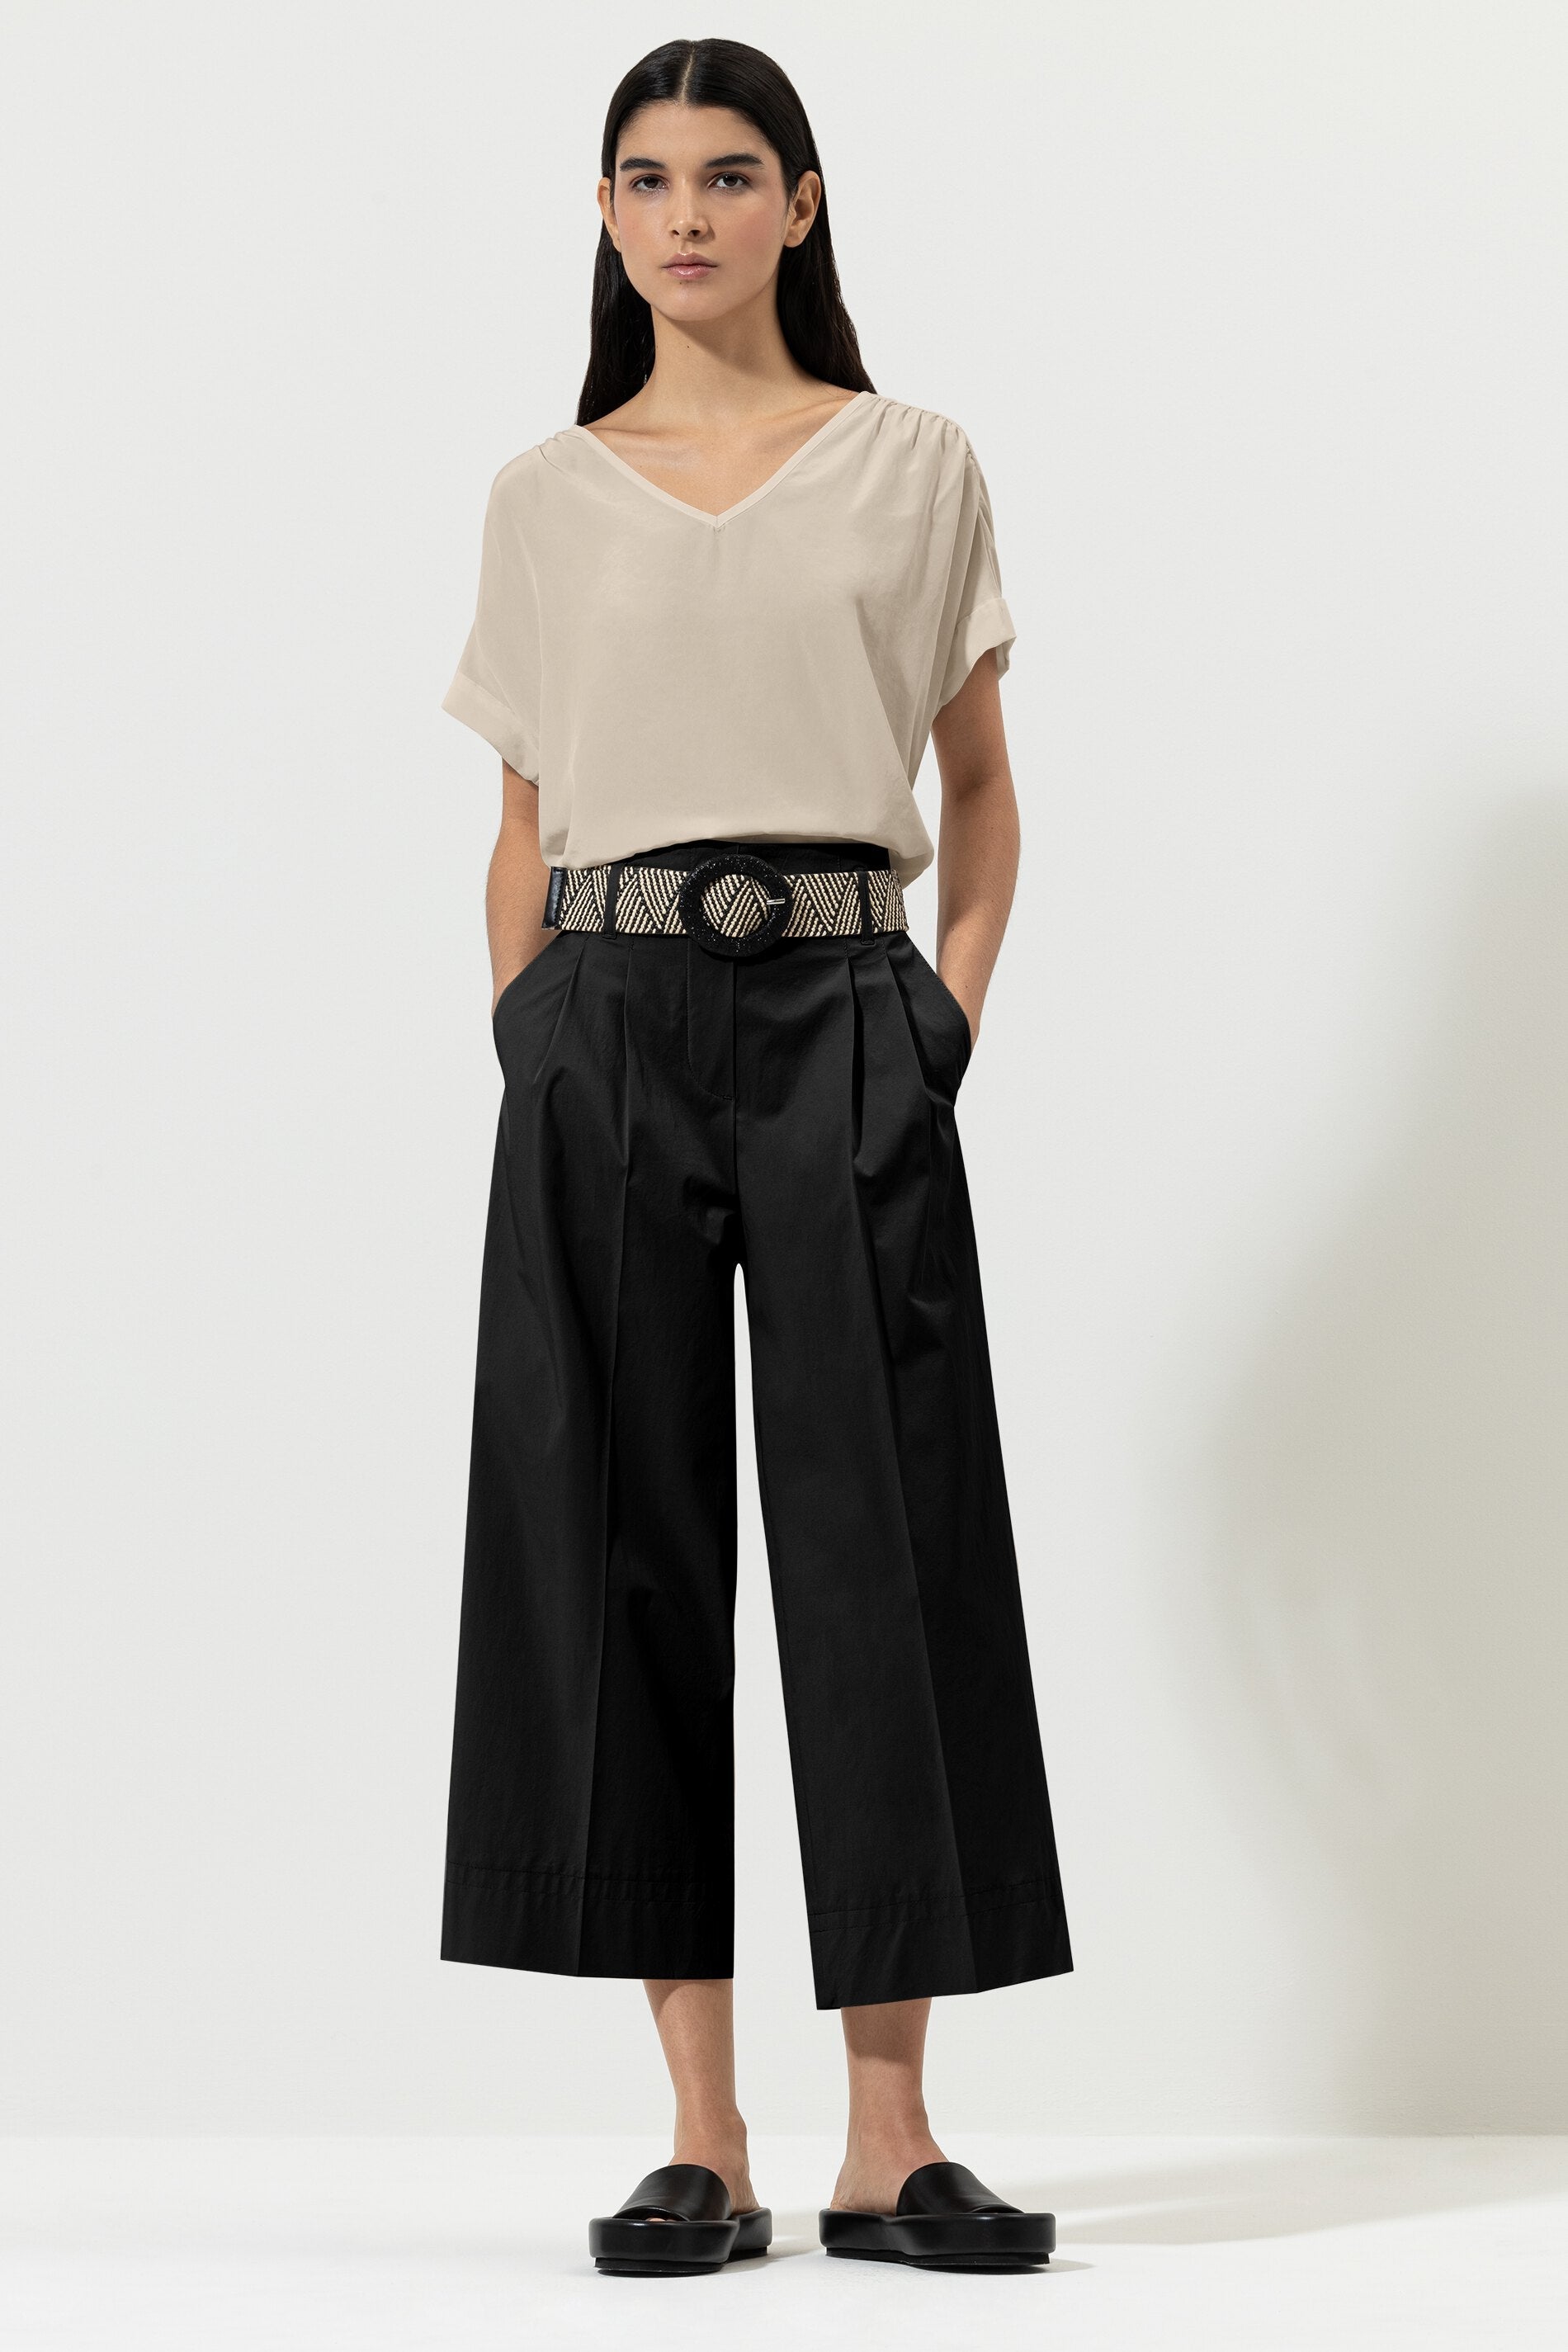 LUISA-CERANO-OUTLET-SALE-Blusenshirt-mit-V-Neck-Shirts-ARCHIVE-COLLECTION_86790c6b-6b56-4918-91c1-fe44a28eee14.jpg